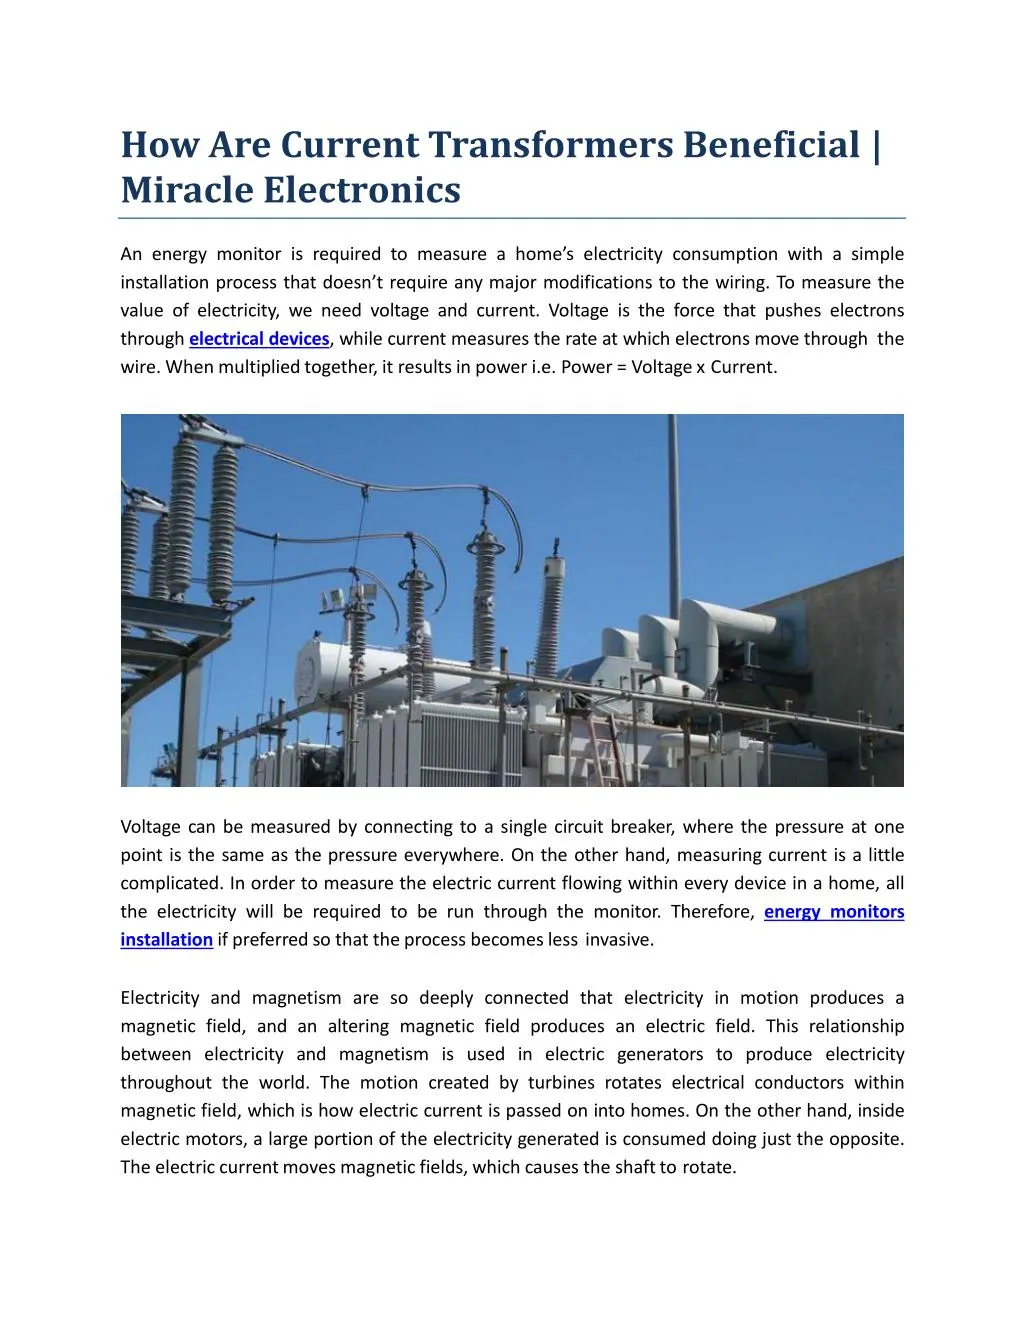 how are current transformers beneficial miracle